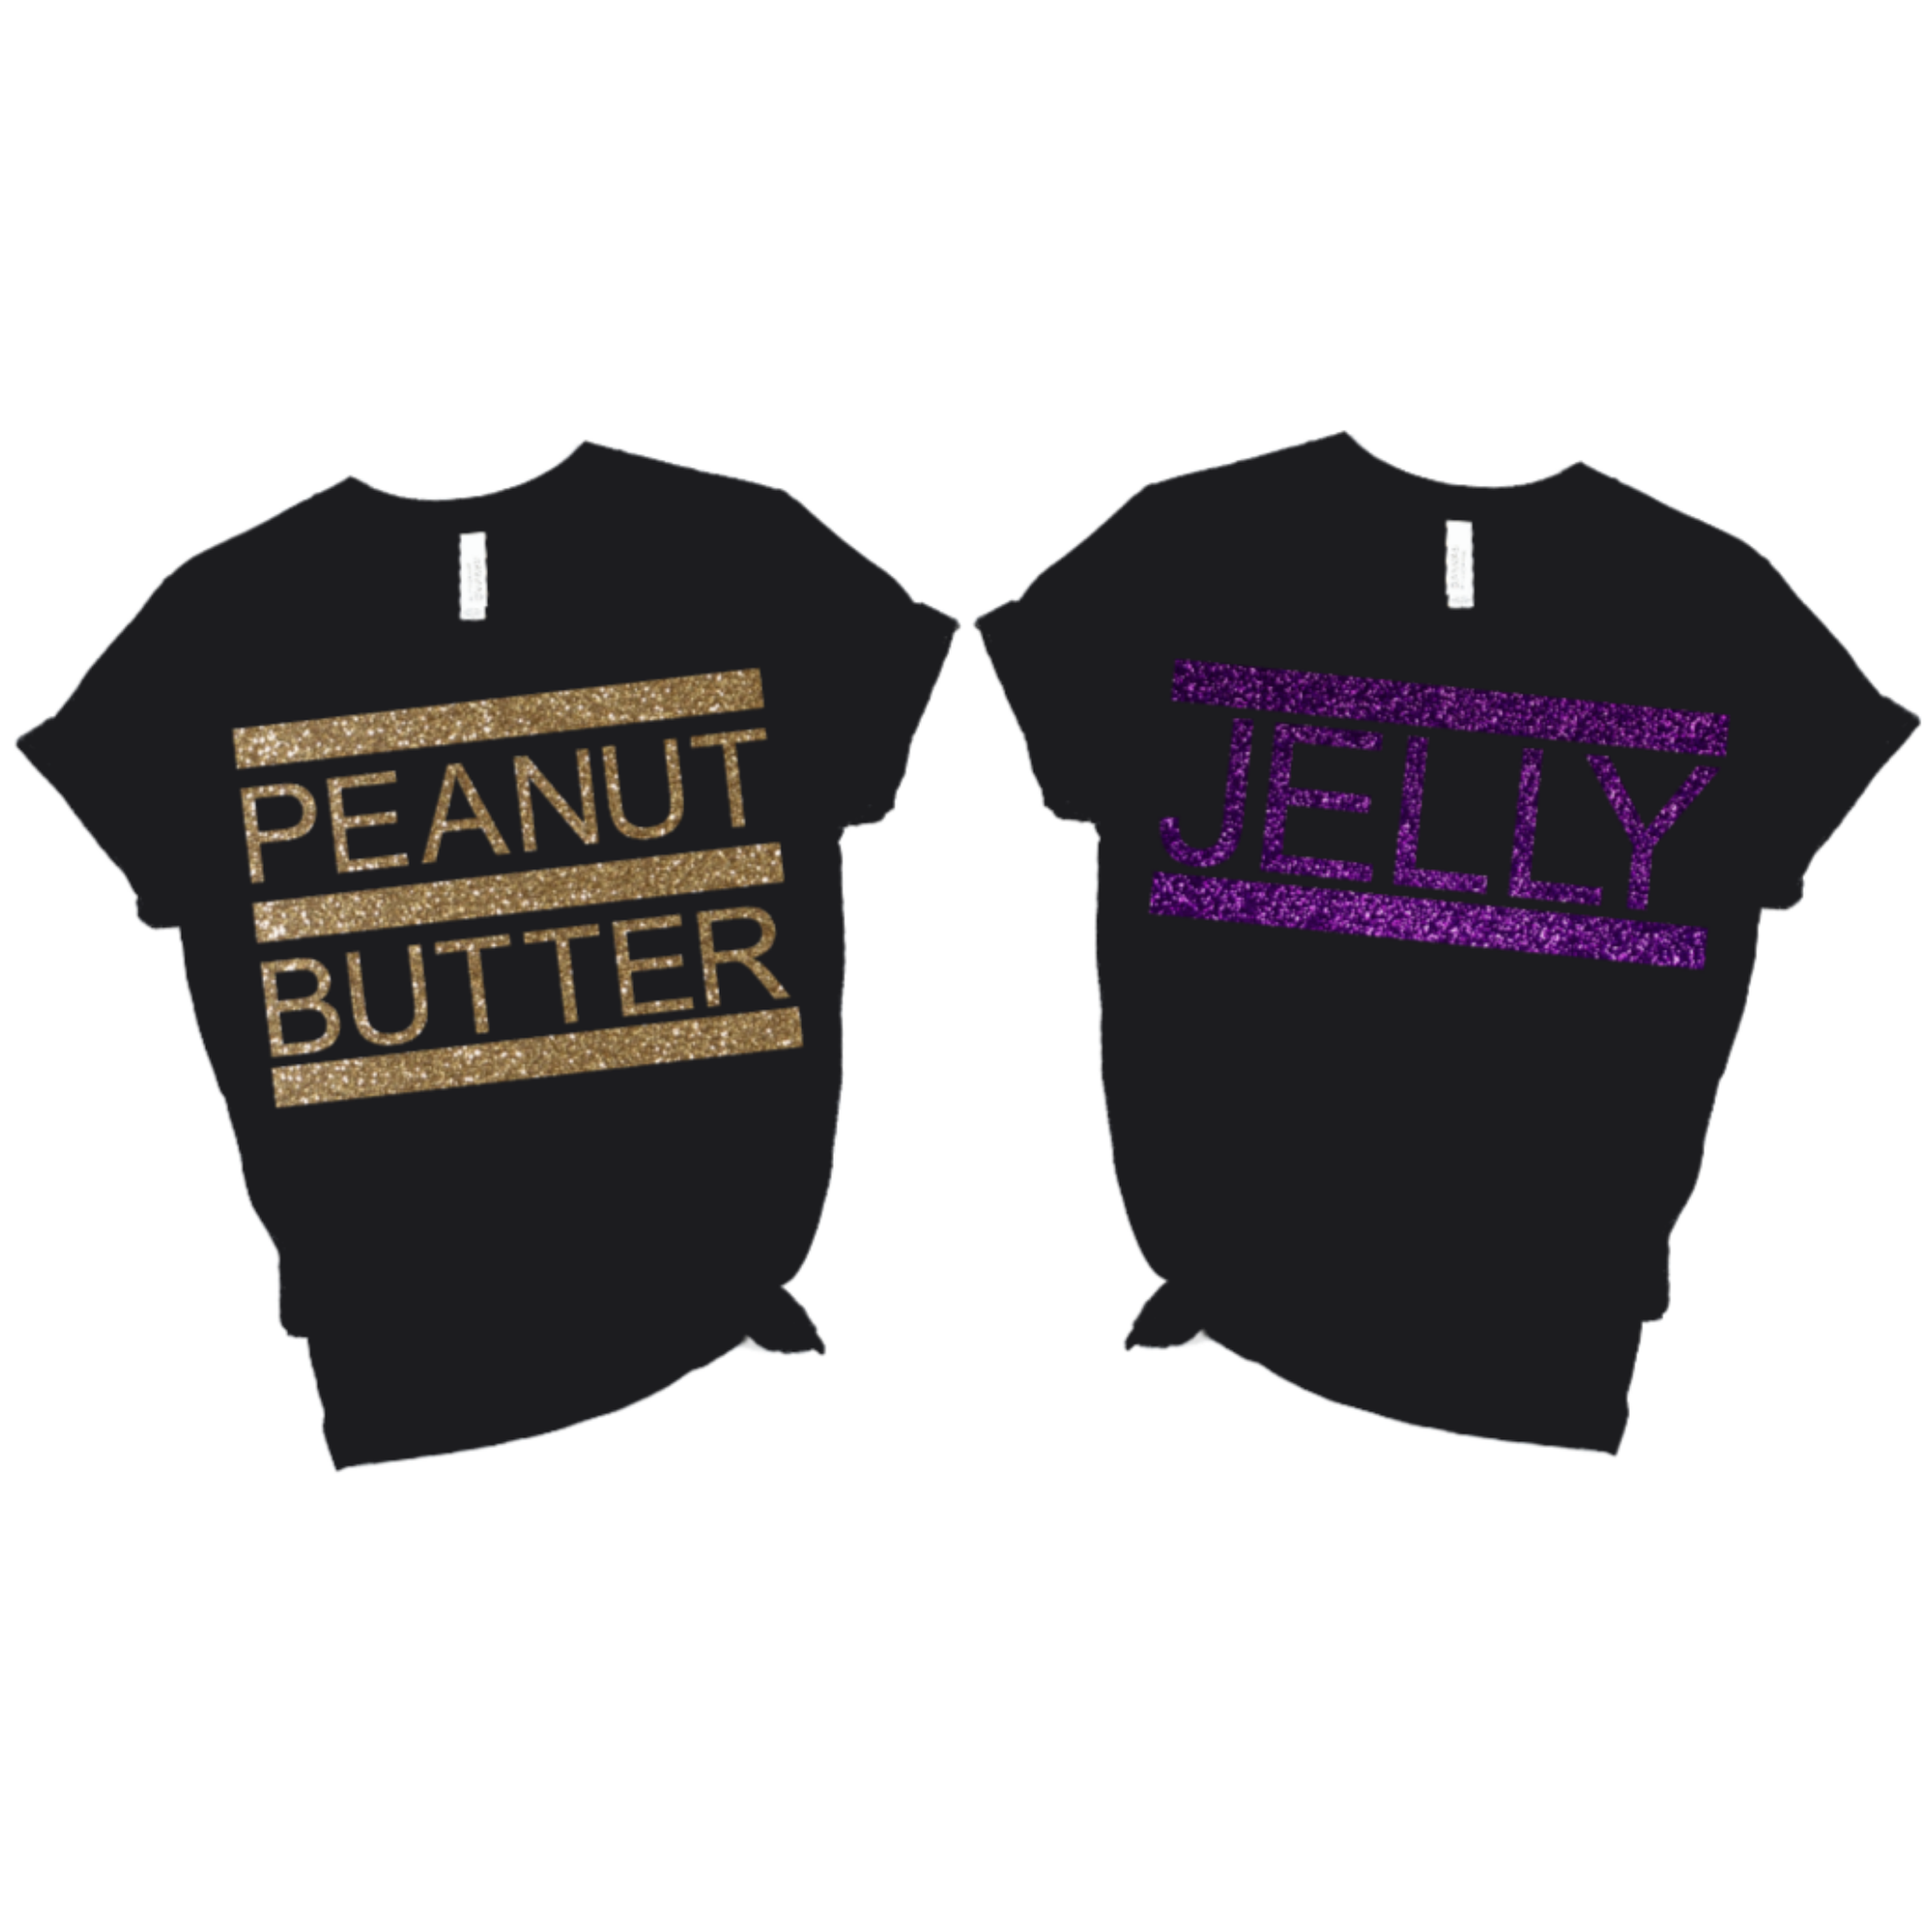 Peanut Butter and Jelly Shirts